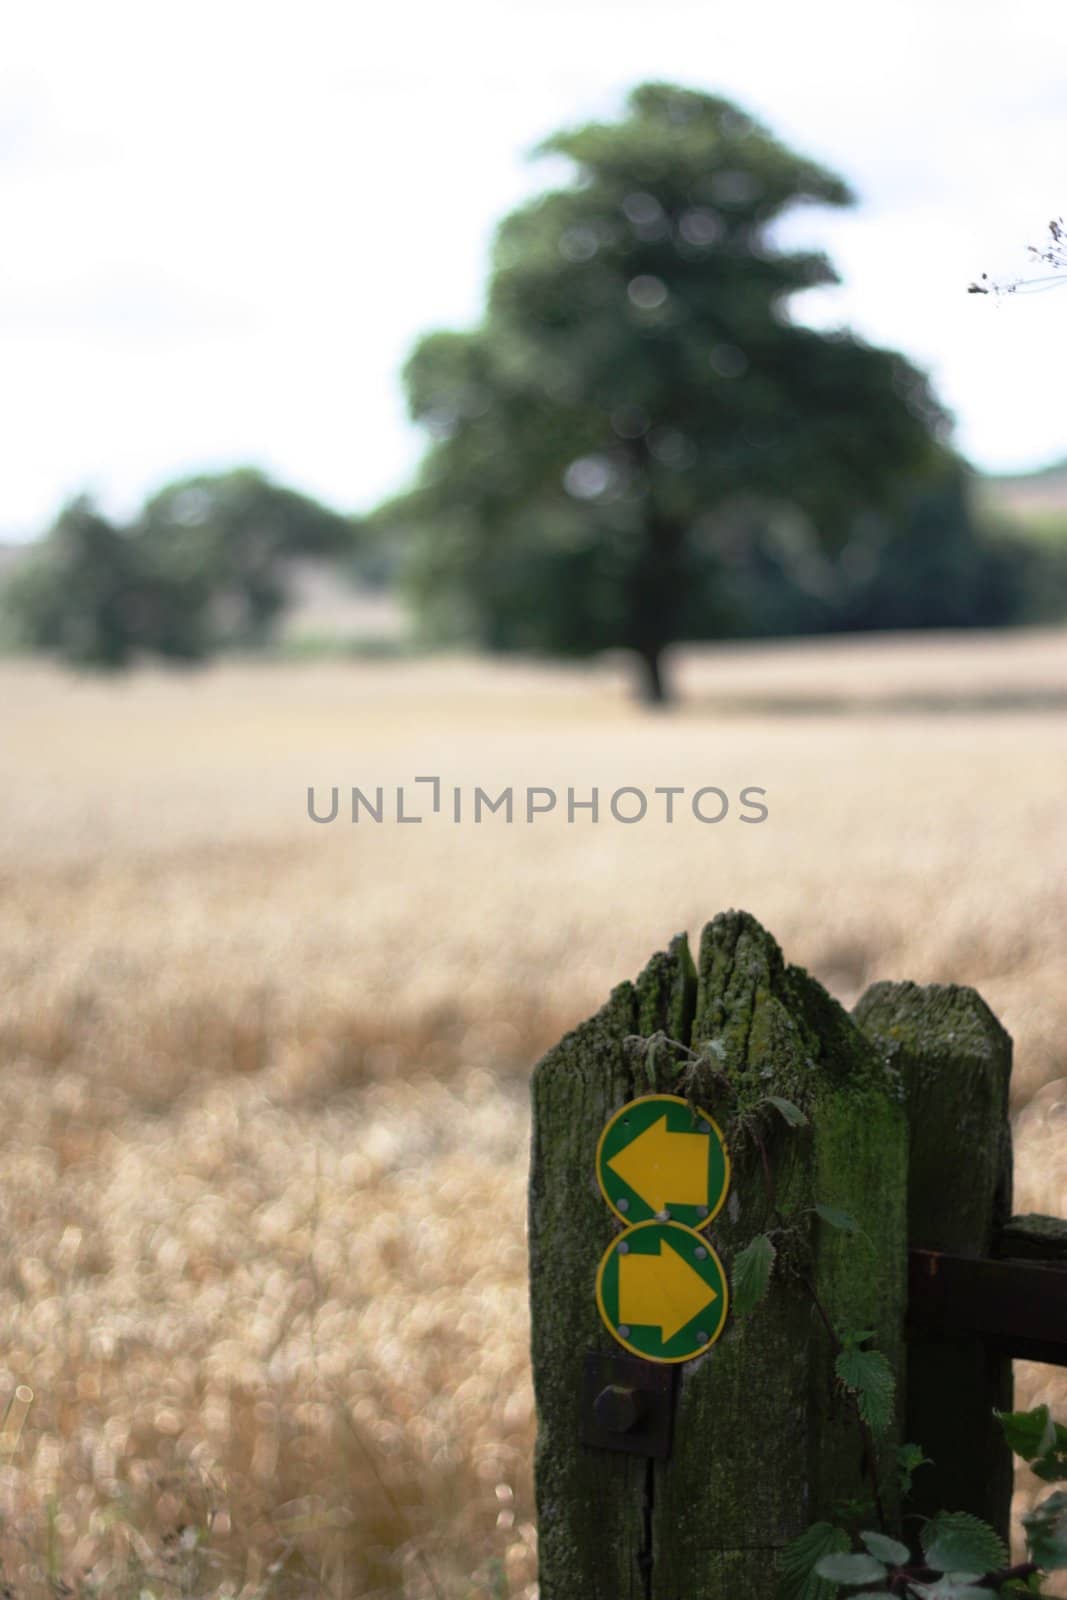 Public Footpath signpost directions by chrisga